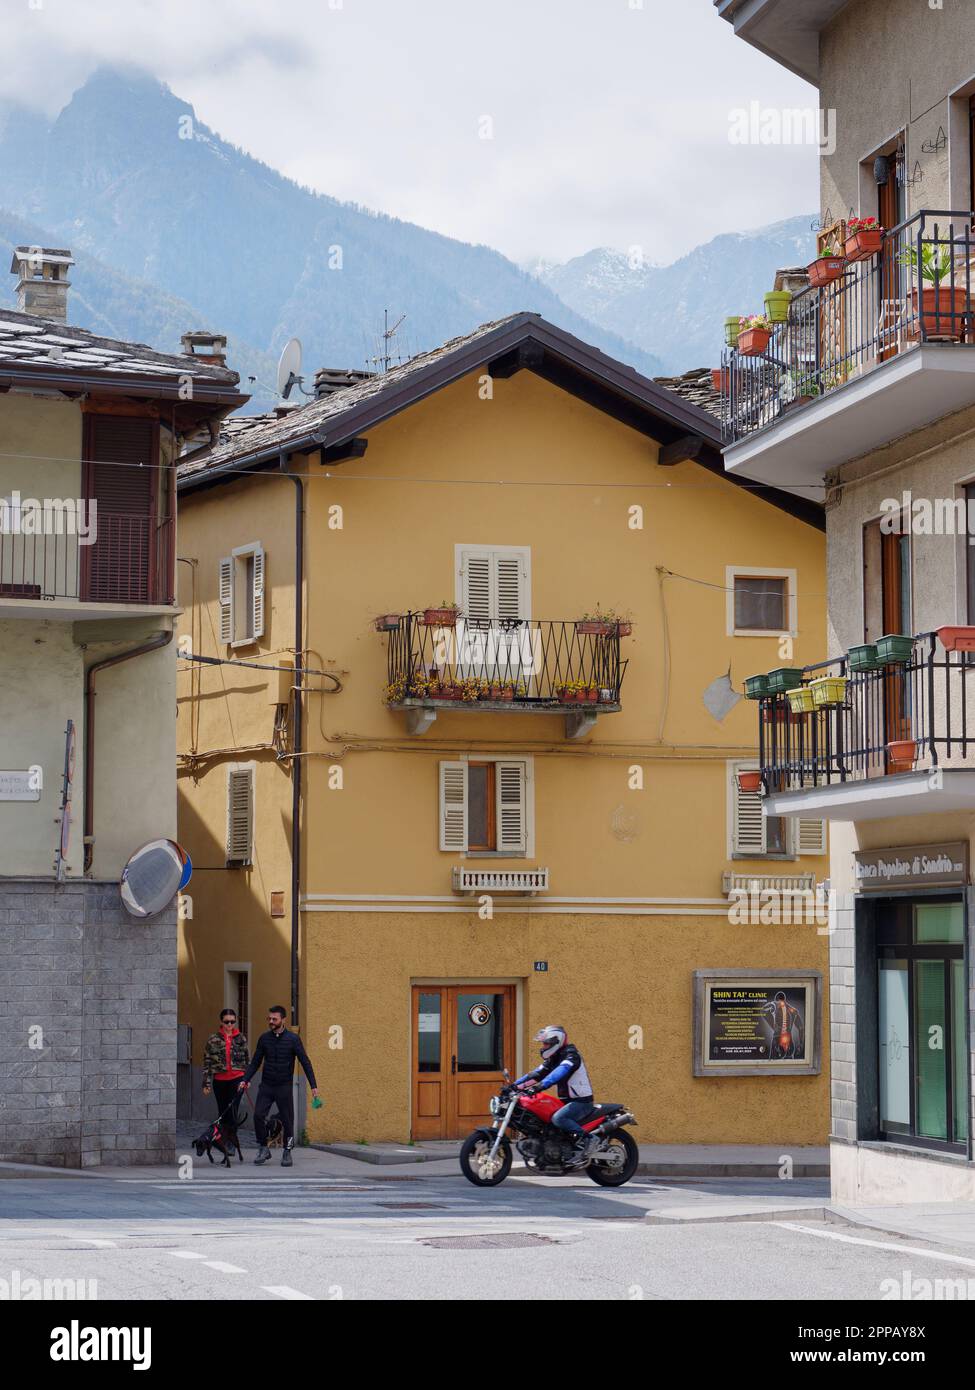 Pedestrians and motor bike in Pont-Saint-Martin, Aosta Valley, NW Italy. Building with colourful flower boxes on balcony and mountains in background Stock Photo